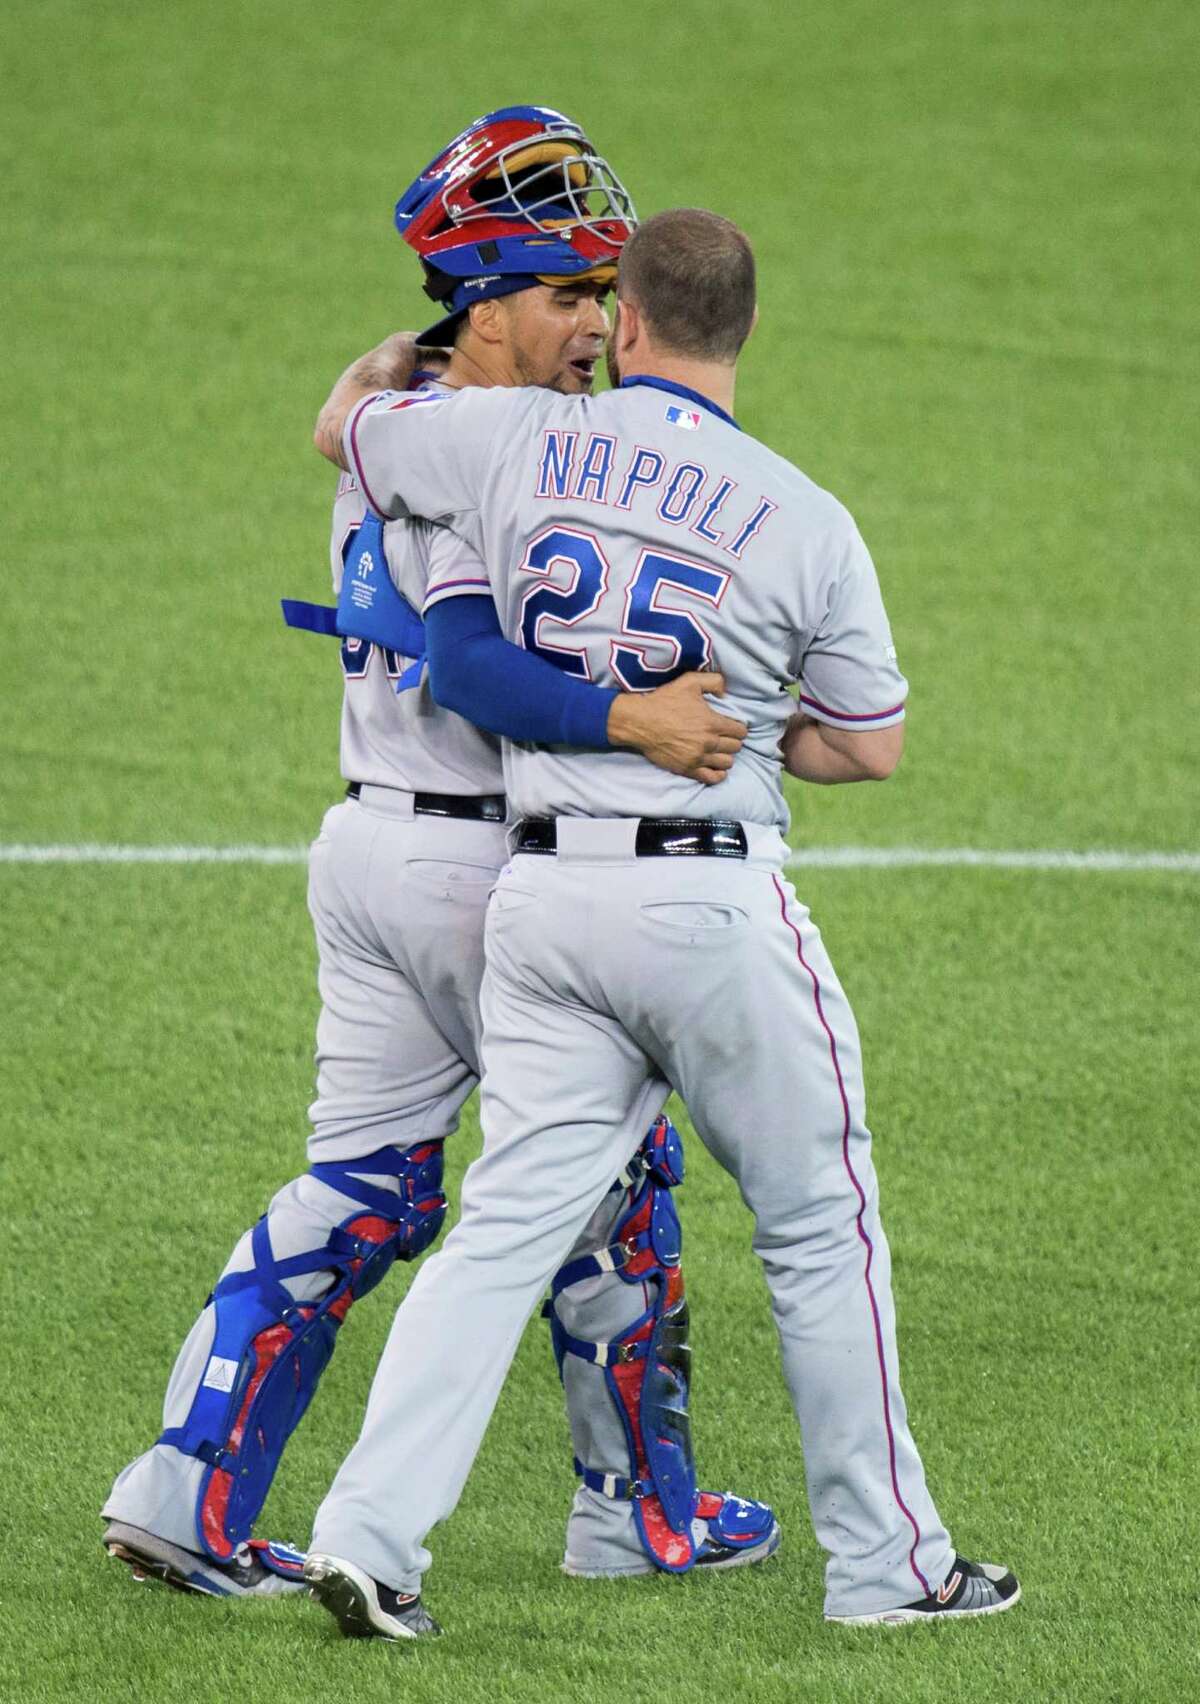 Texas Rangers Robinson Chirinos, left, and Mike Napoli celebrate their 5-3 win of Game 1 of the American League Division Series against the Toronto Blue Jays in Toronto on Thursday, Oct. 8, 2015. (Darren Calabrese/The Canadian Press via AP) MANDATORY CREDIT